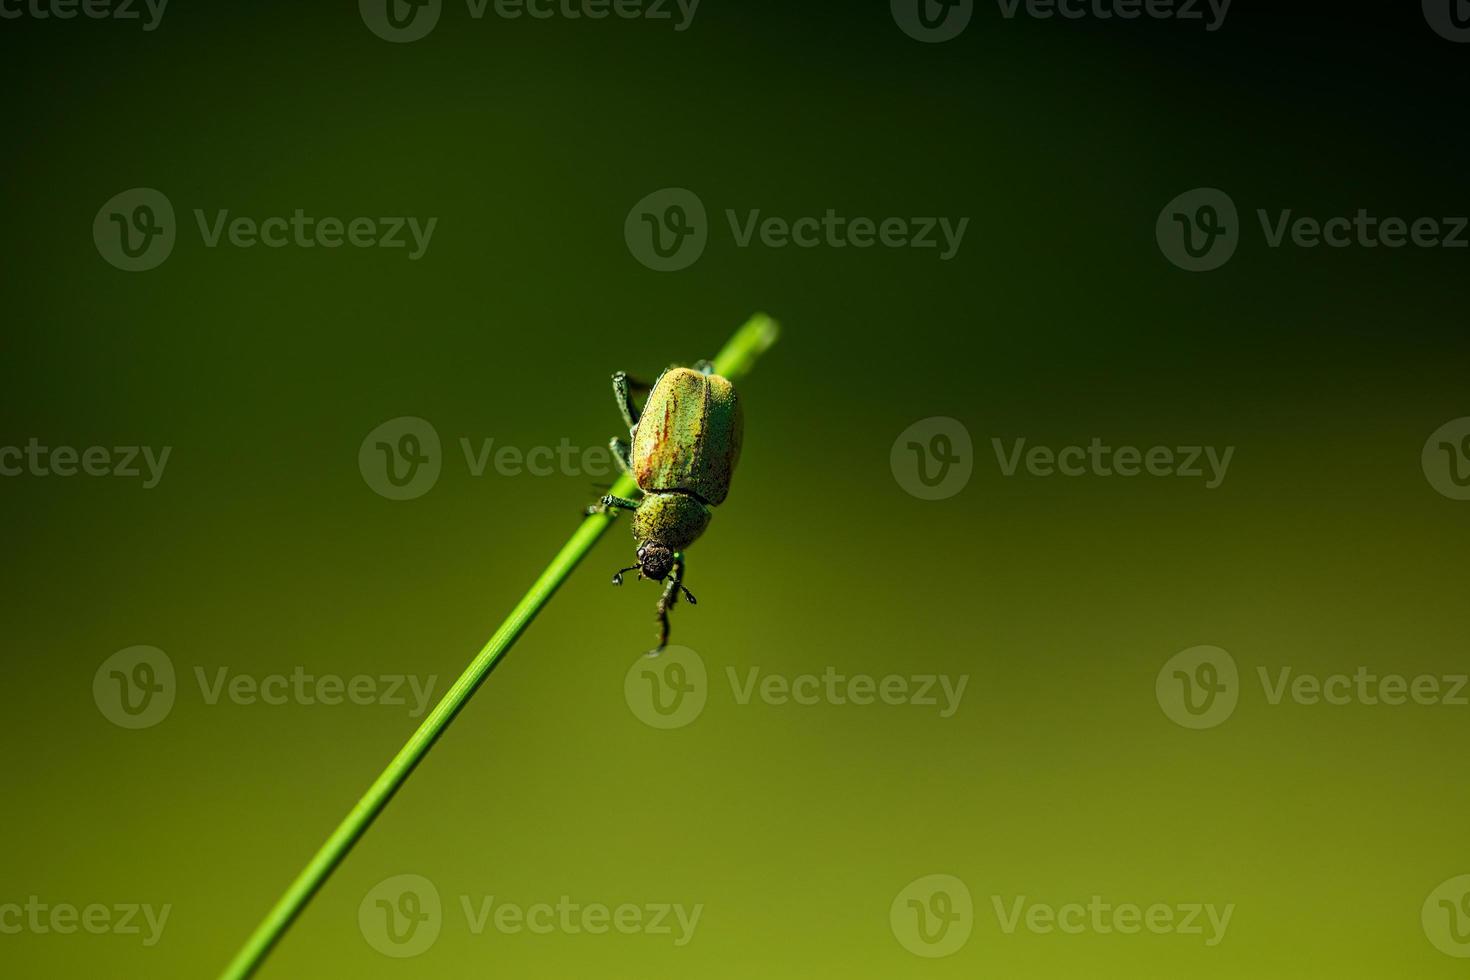 Small green beetle hanging from grass photo